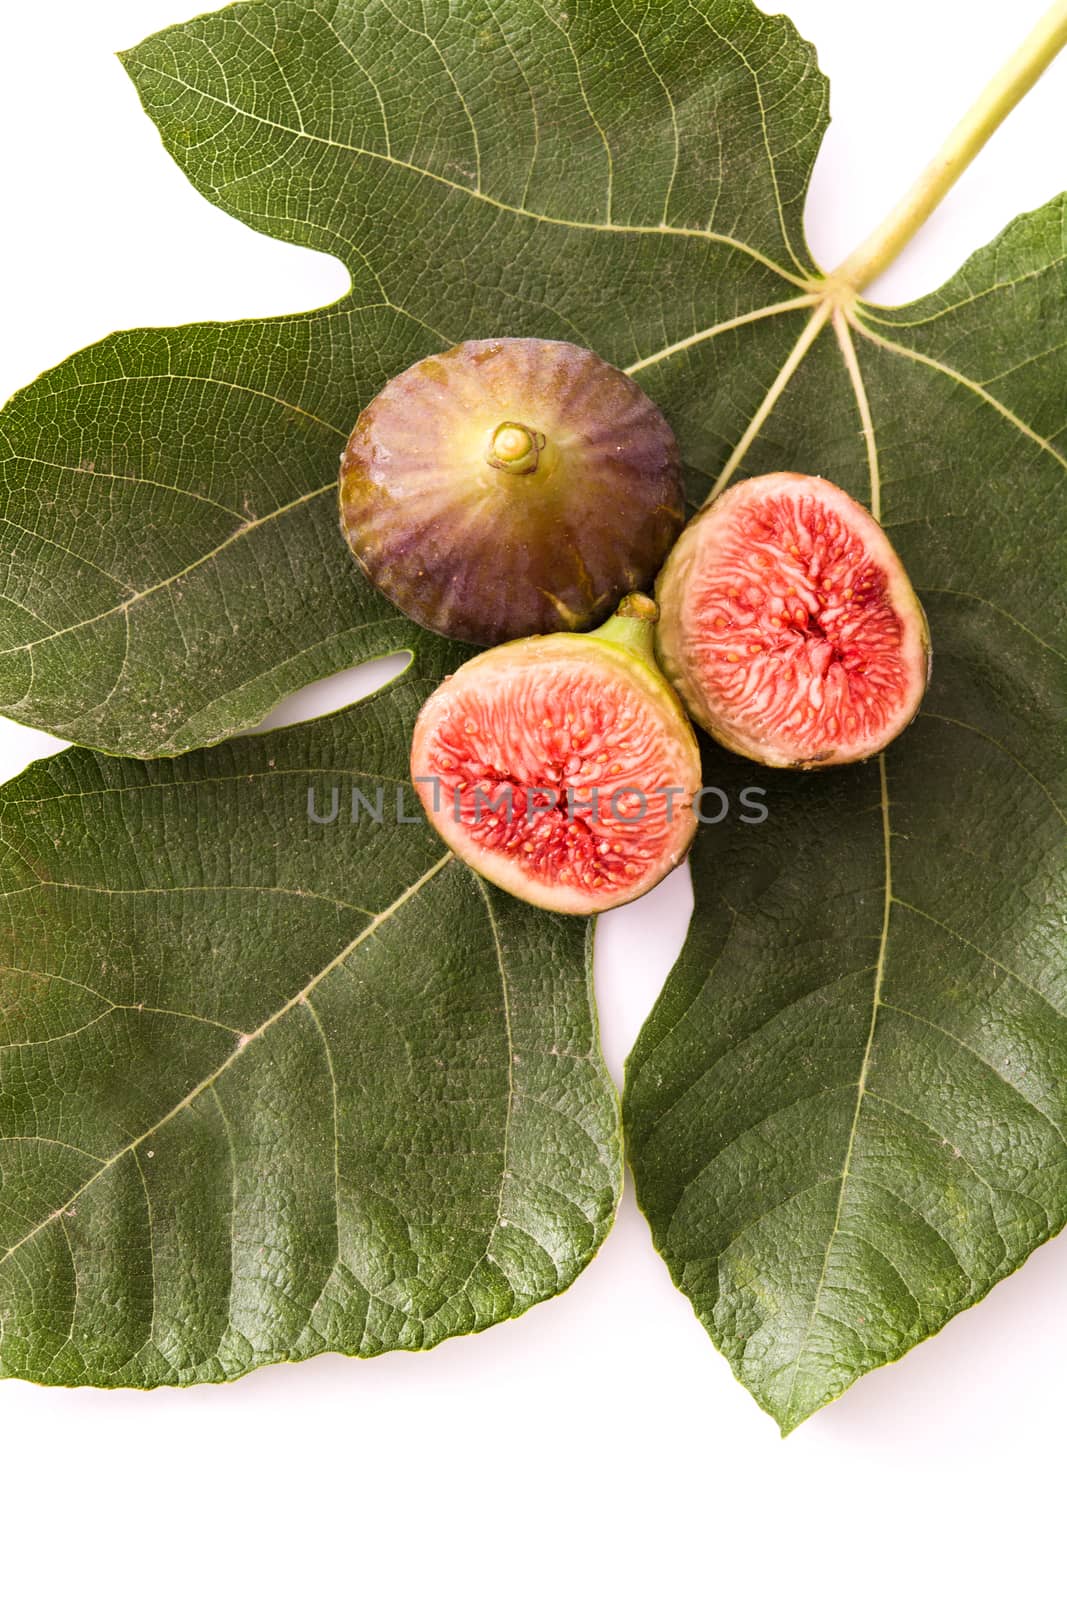 Fresh figs isolated on white background by chandlervid85